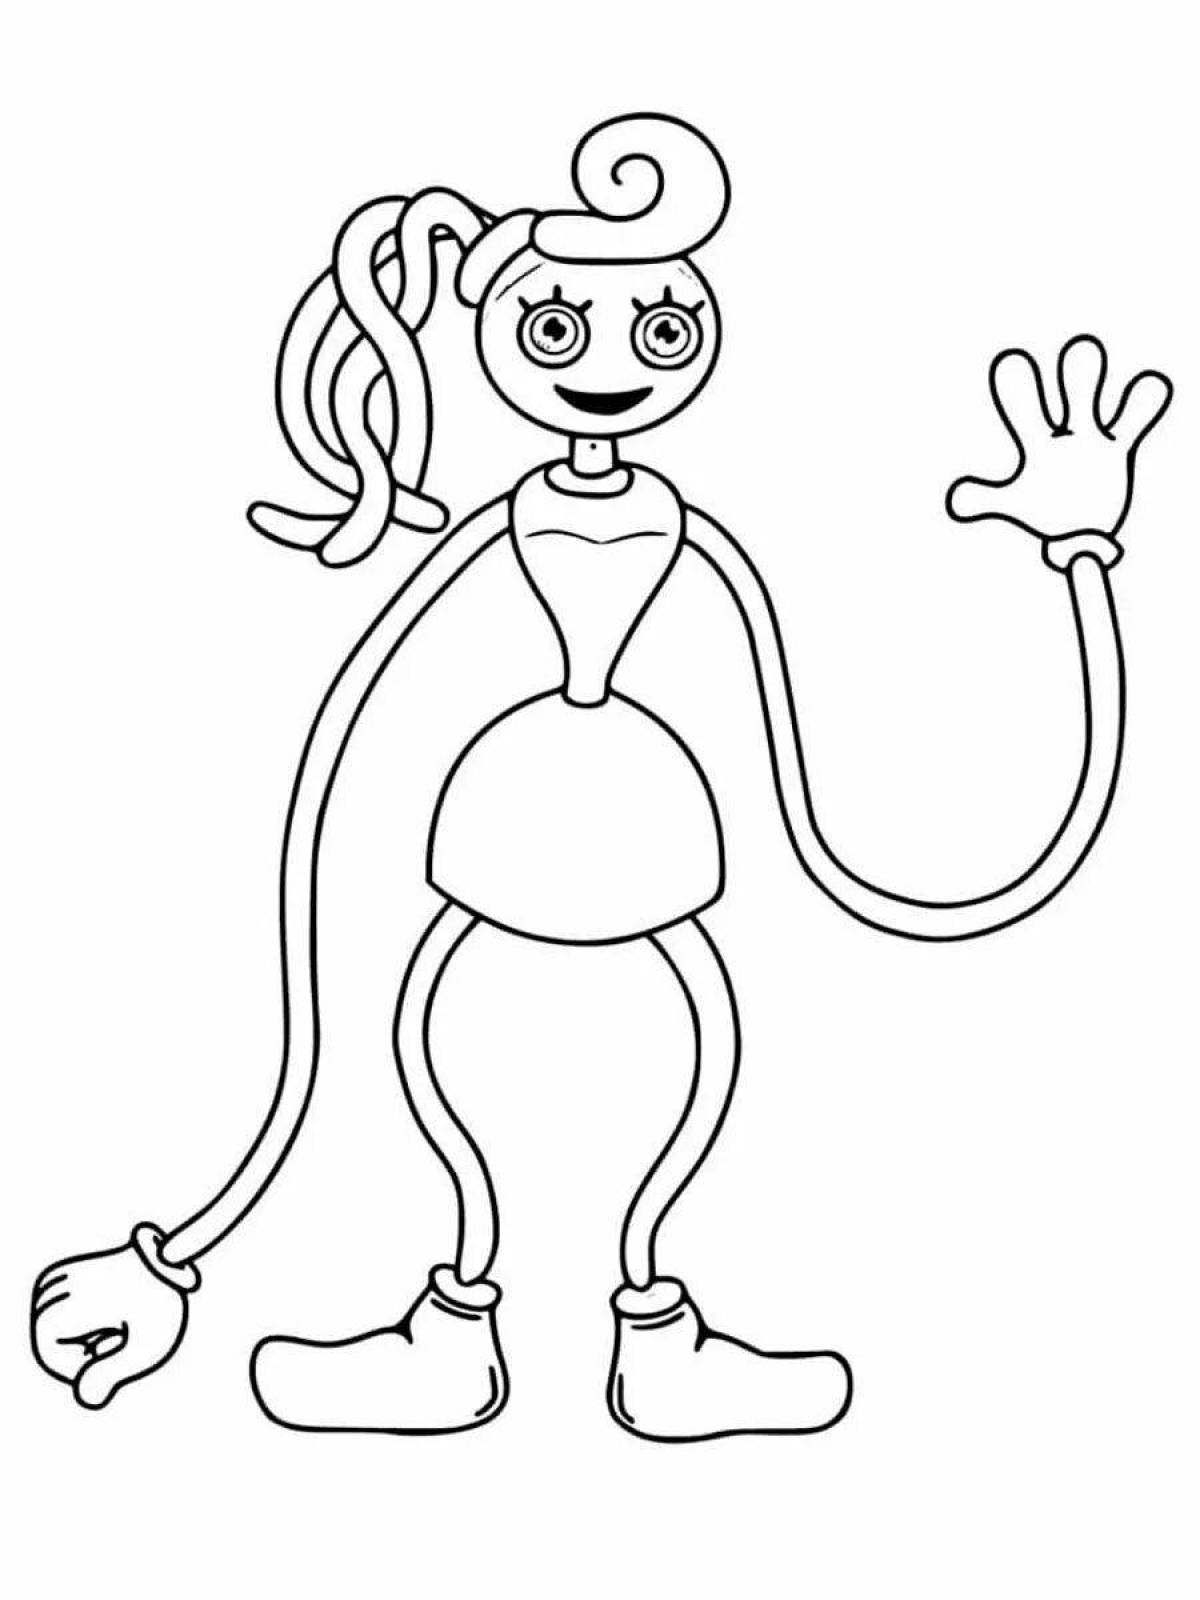 Daddy Long Legs Adorable Coloring Page